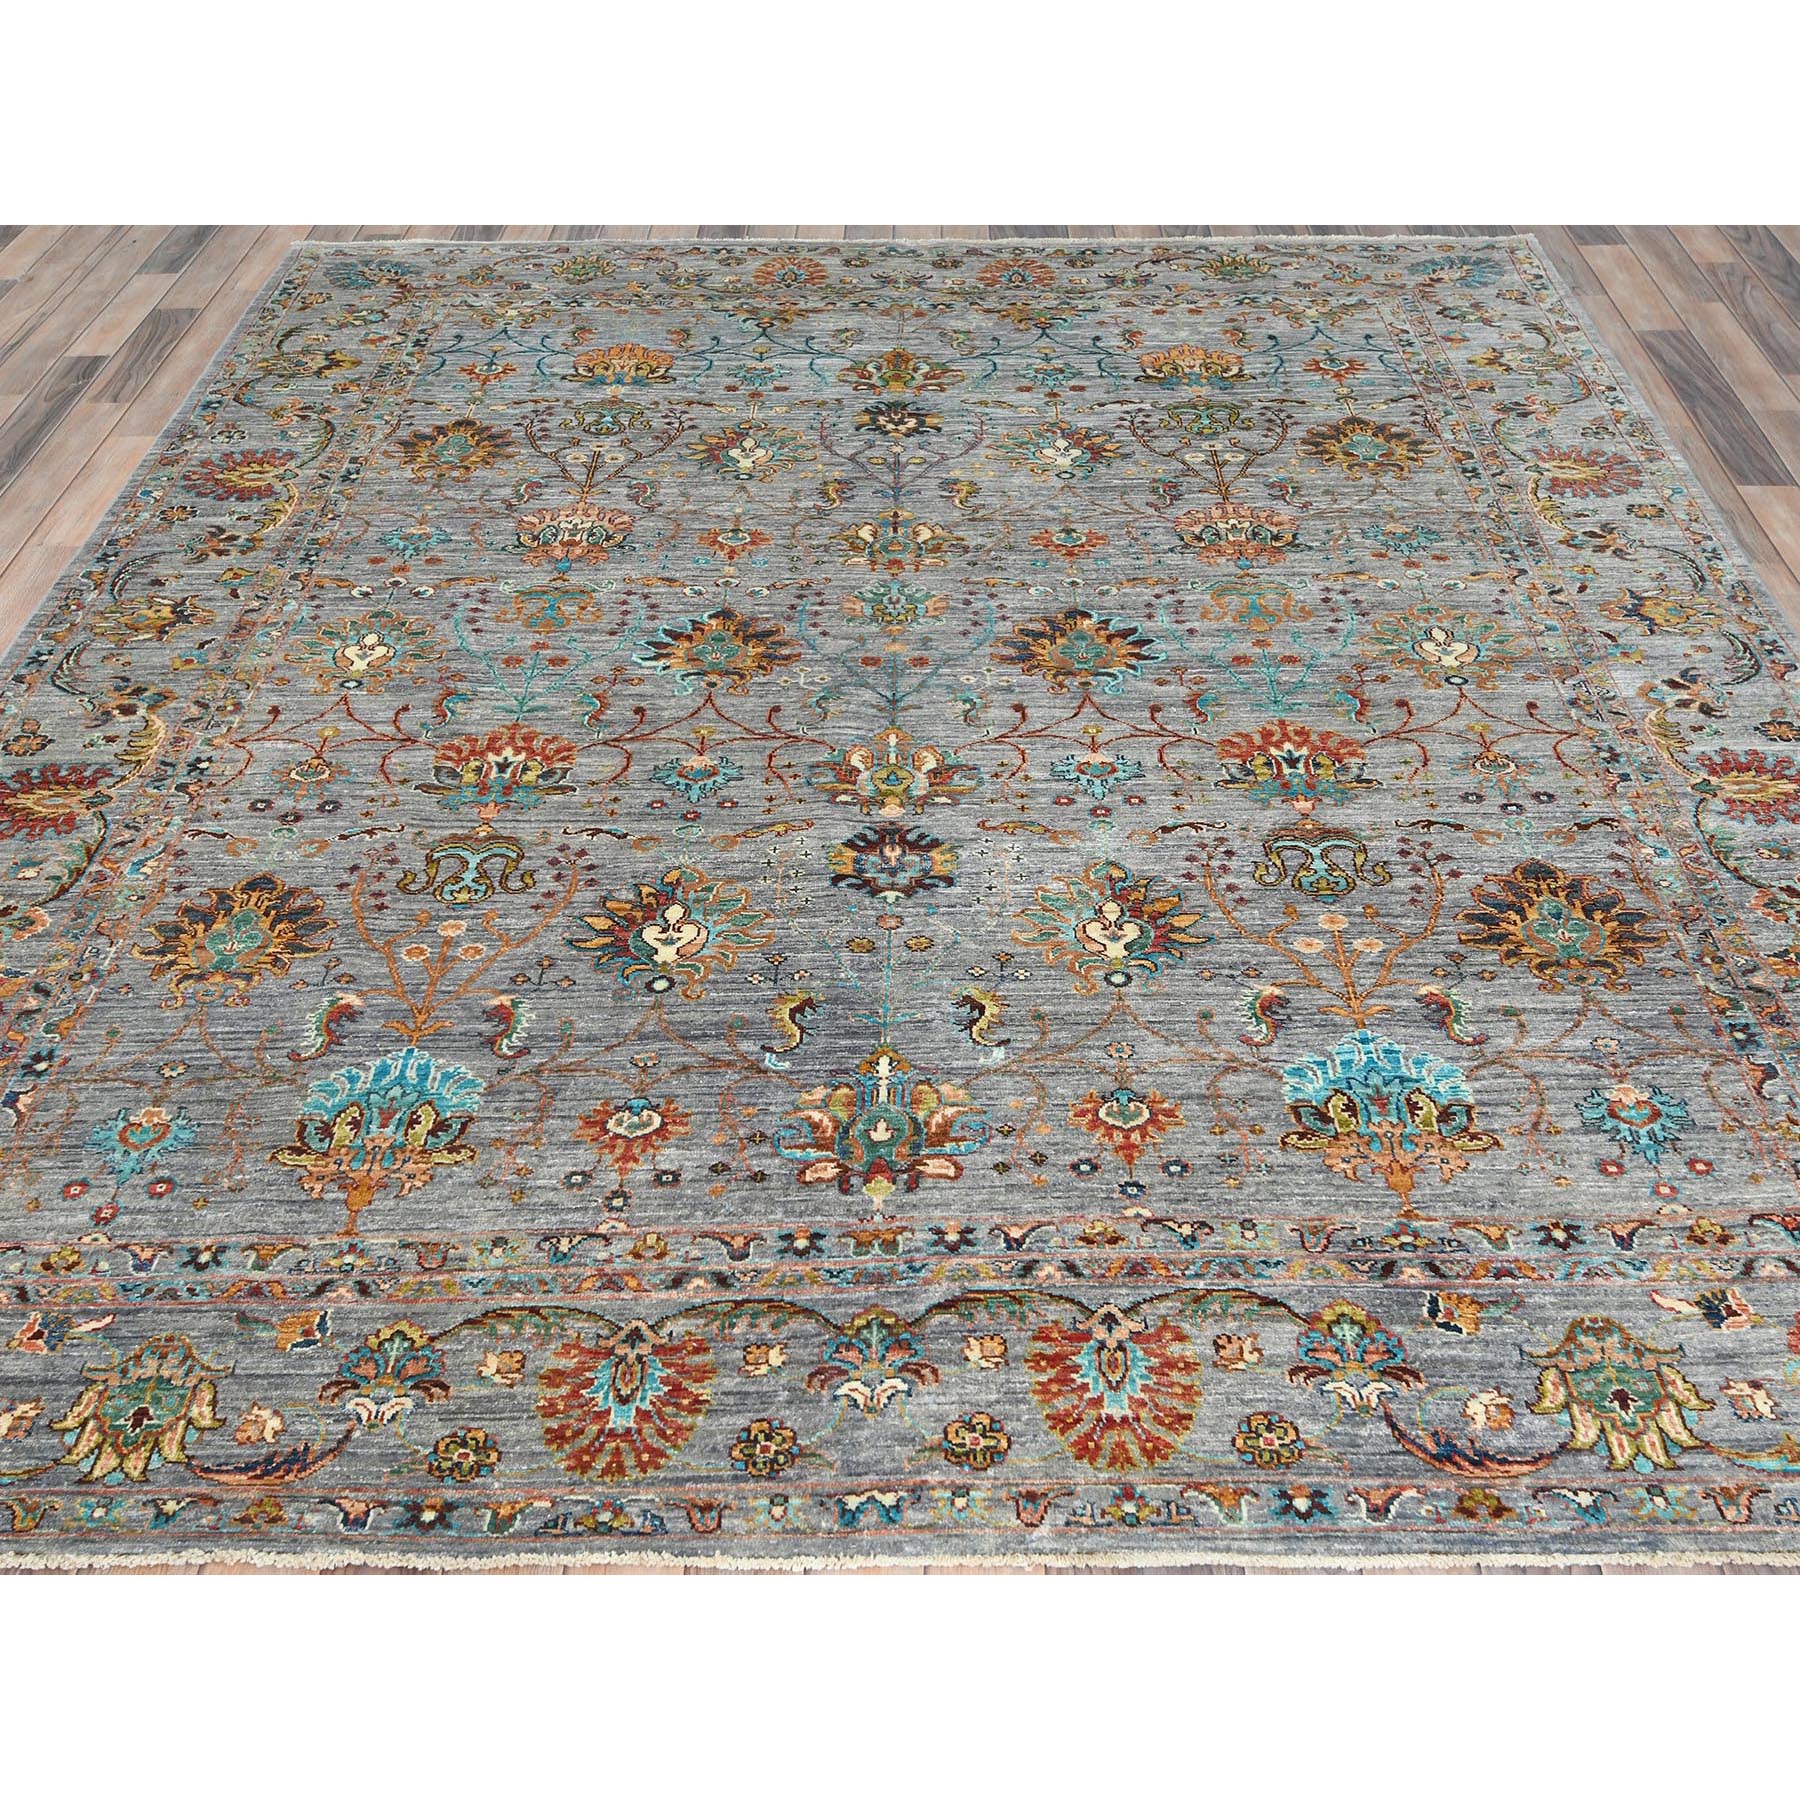 8'x9'6" Light Gray, Fine Peshawar with Mahal Design, Natural Dyes Densely Woven, Natural Wool Hand Woven, Oriental Rug 